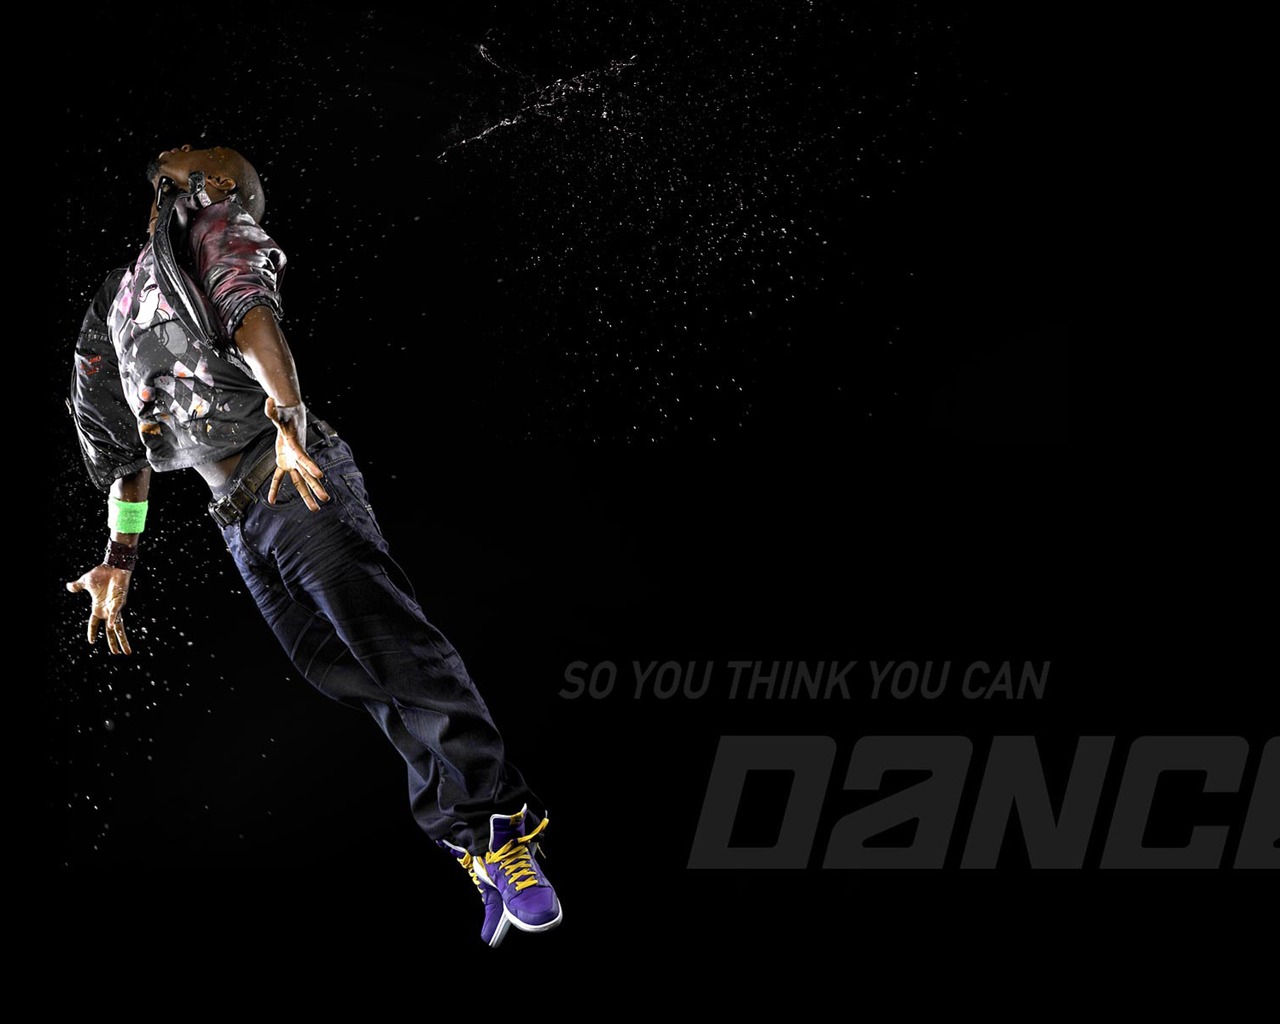 So You Think You Can Dance 舞林争霸 壁纸(一)10 - 1280x1024